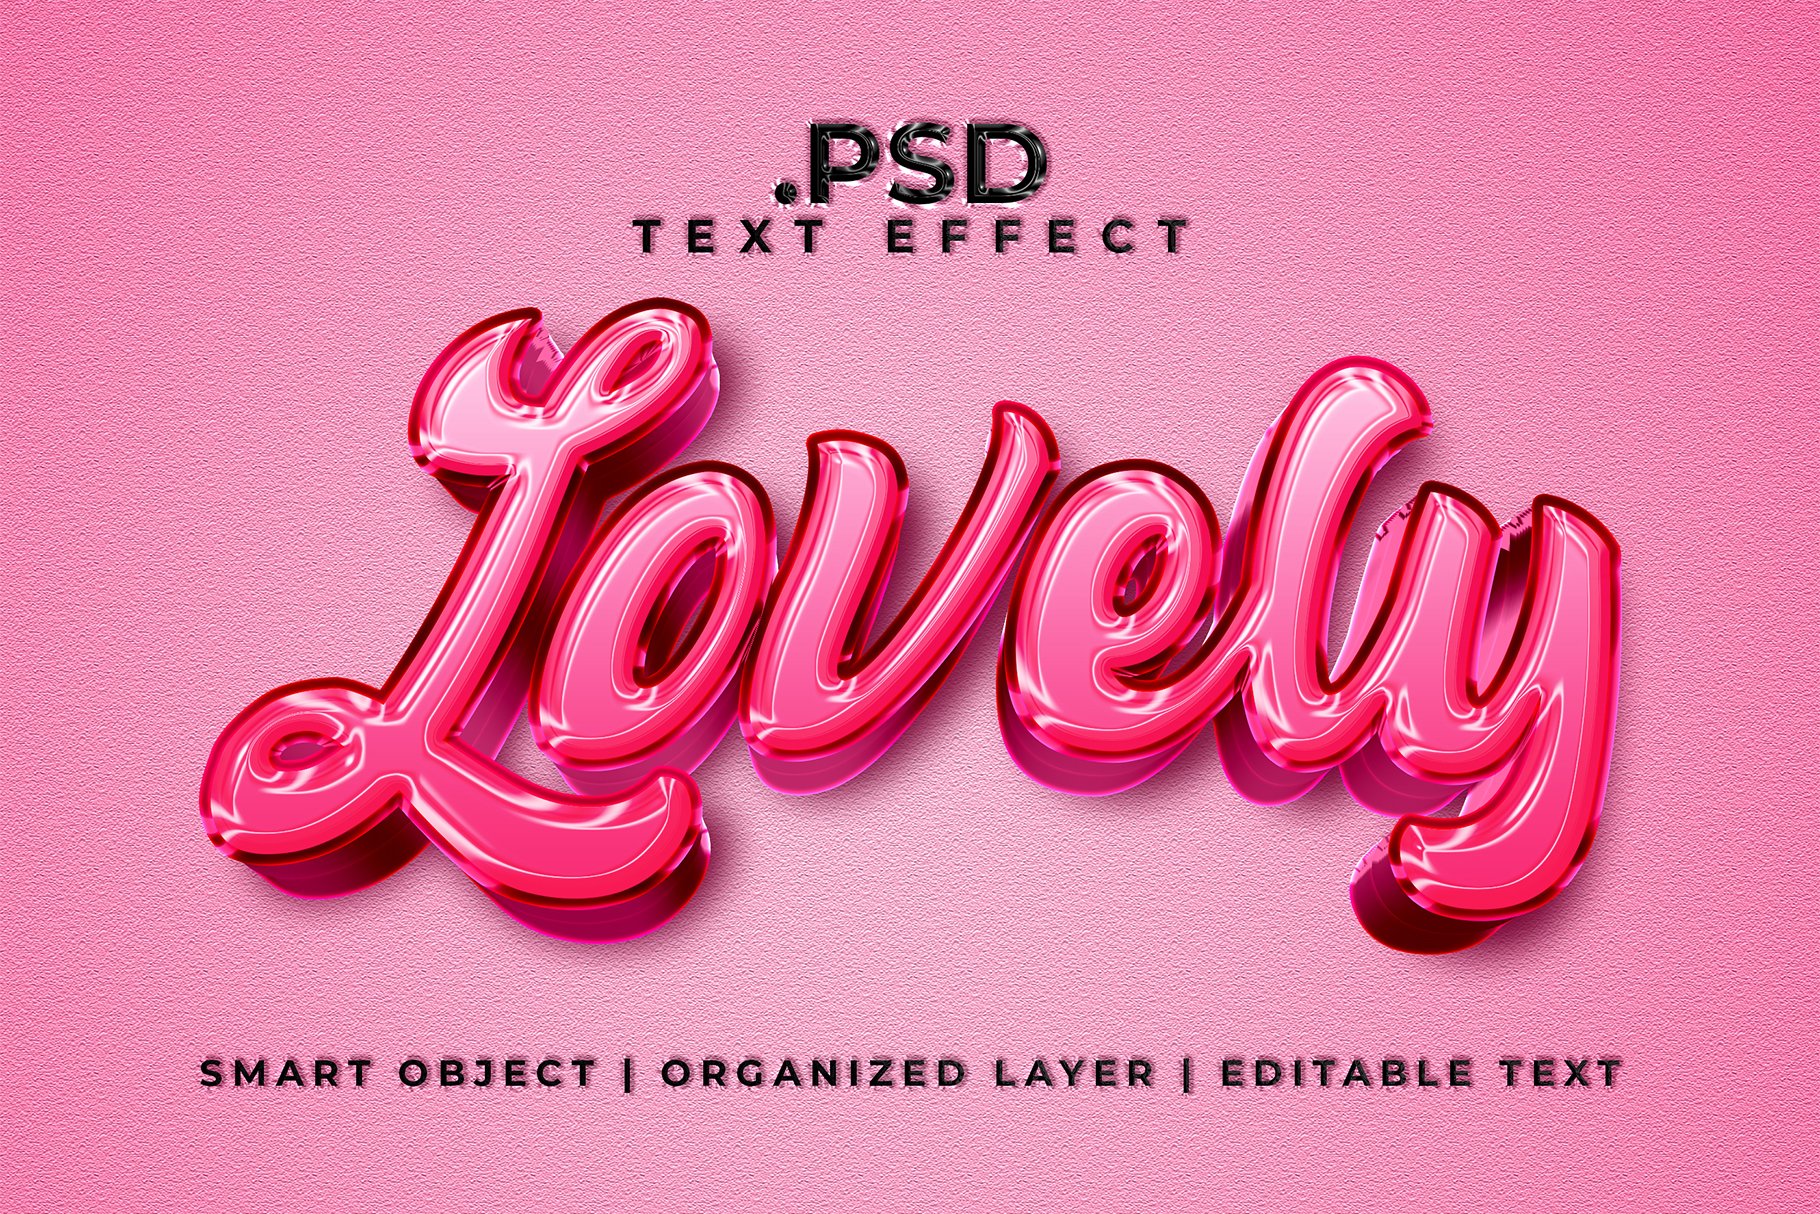 Lovely Text Effectcover image.